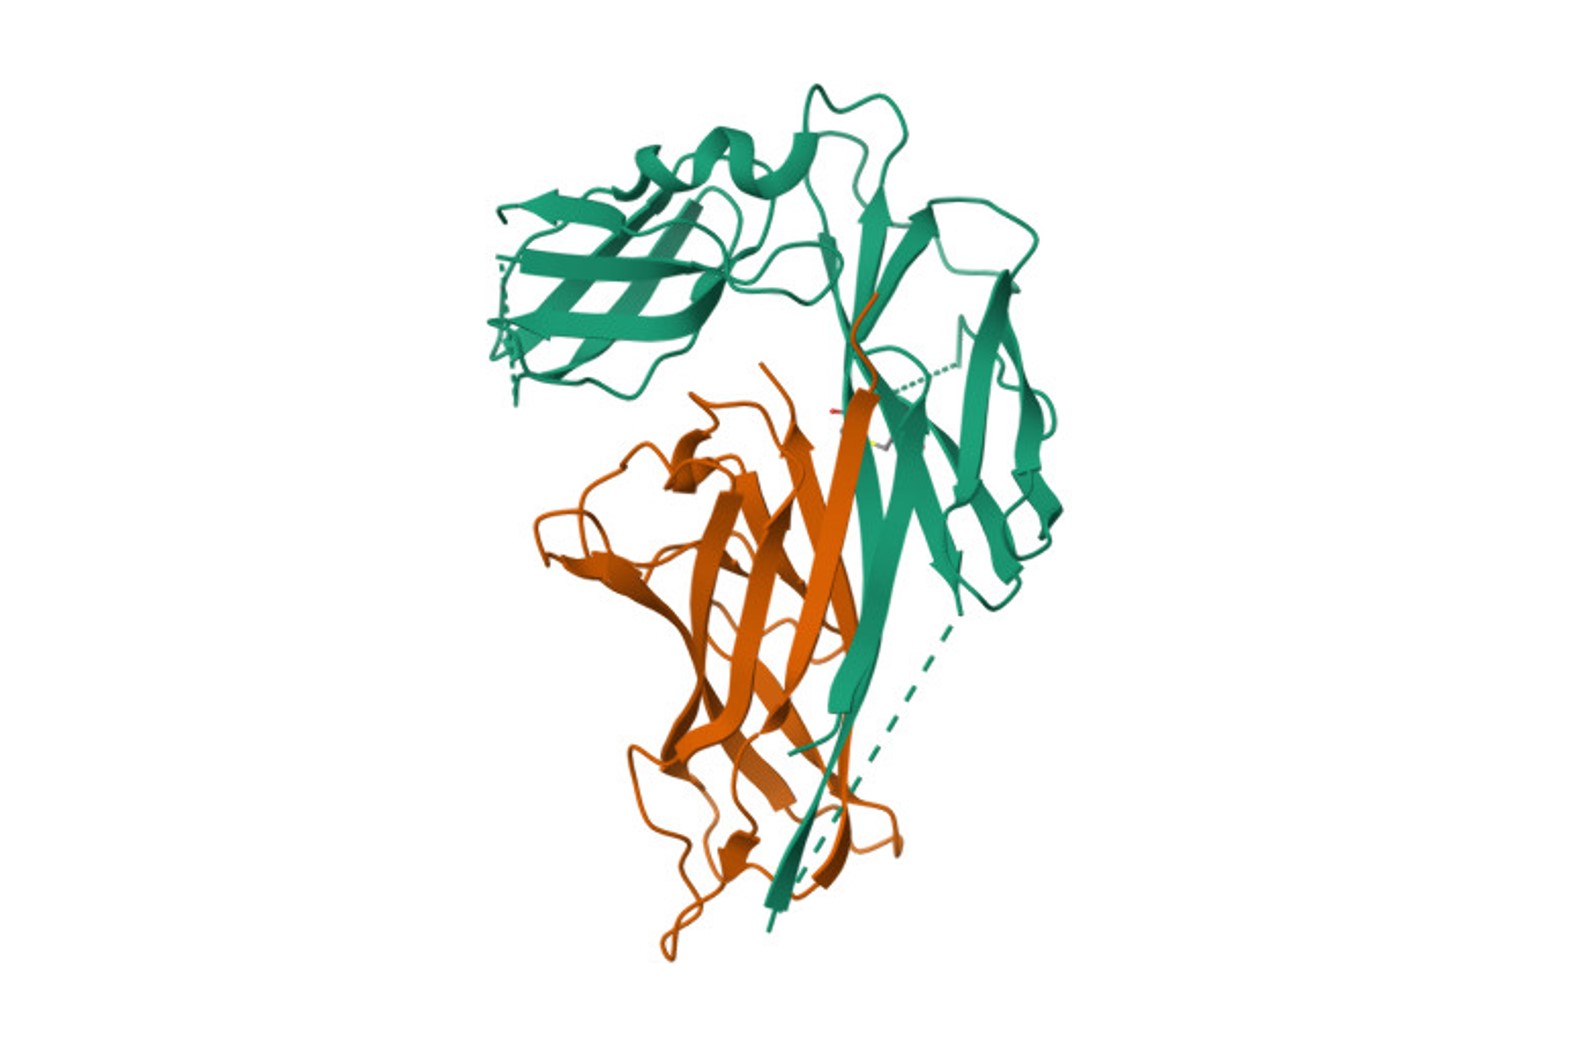 The talented Caf1 protein